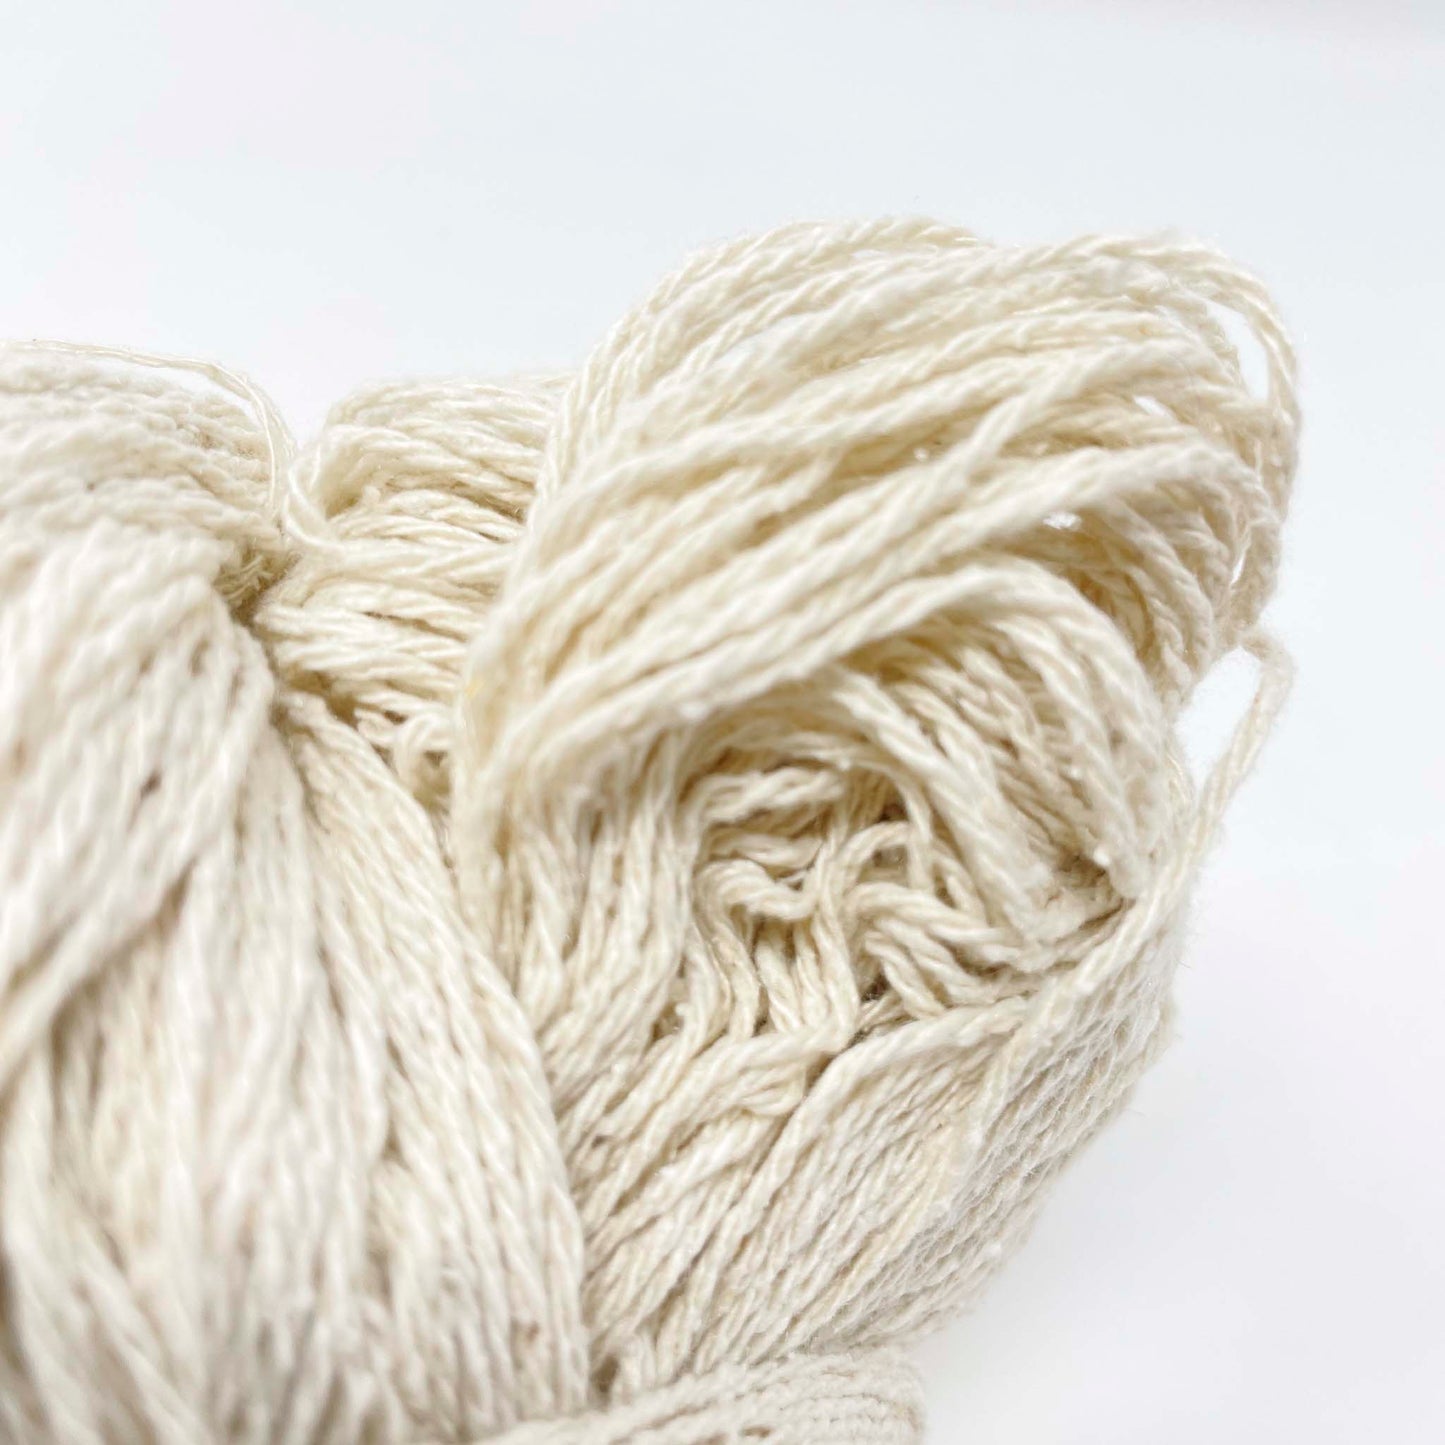 Specialty Rough Weave Yarn - Natural (7.8 oz)